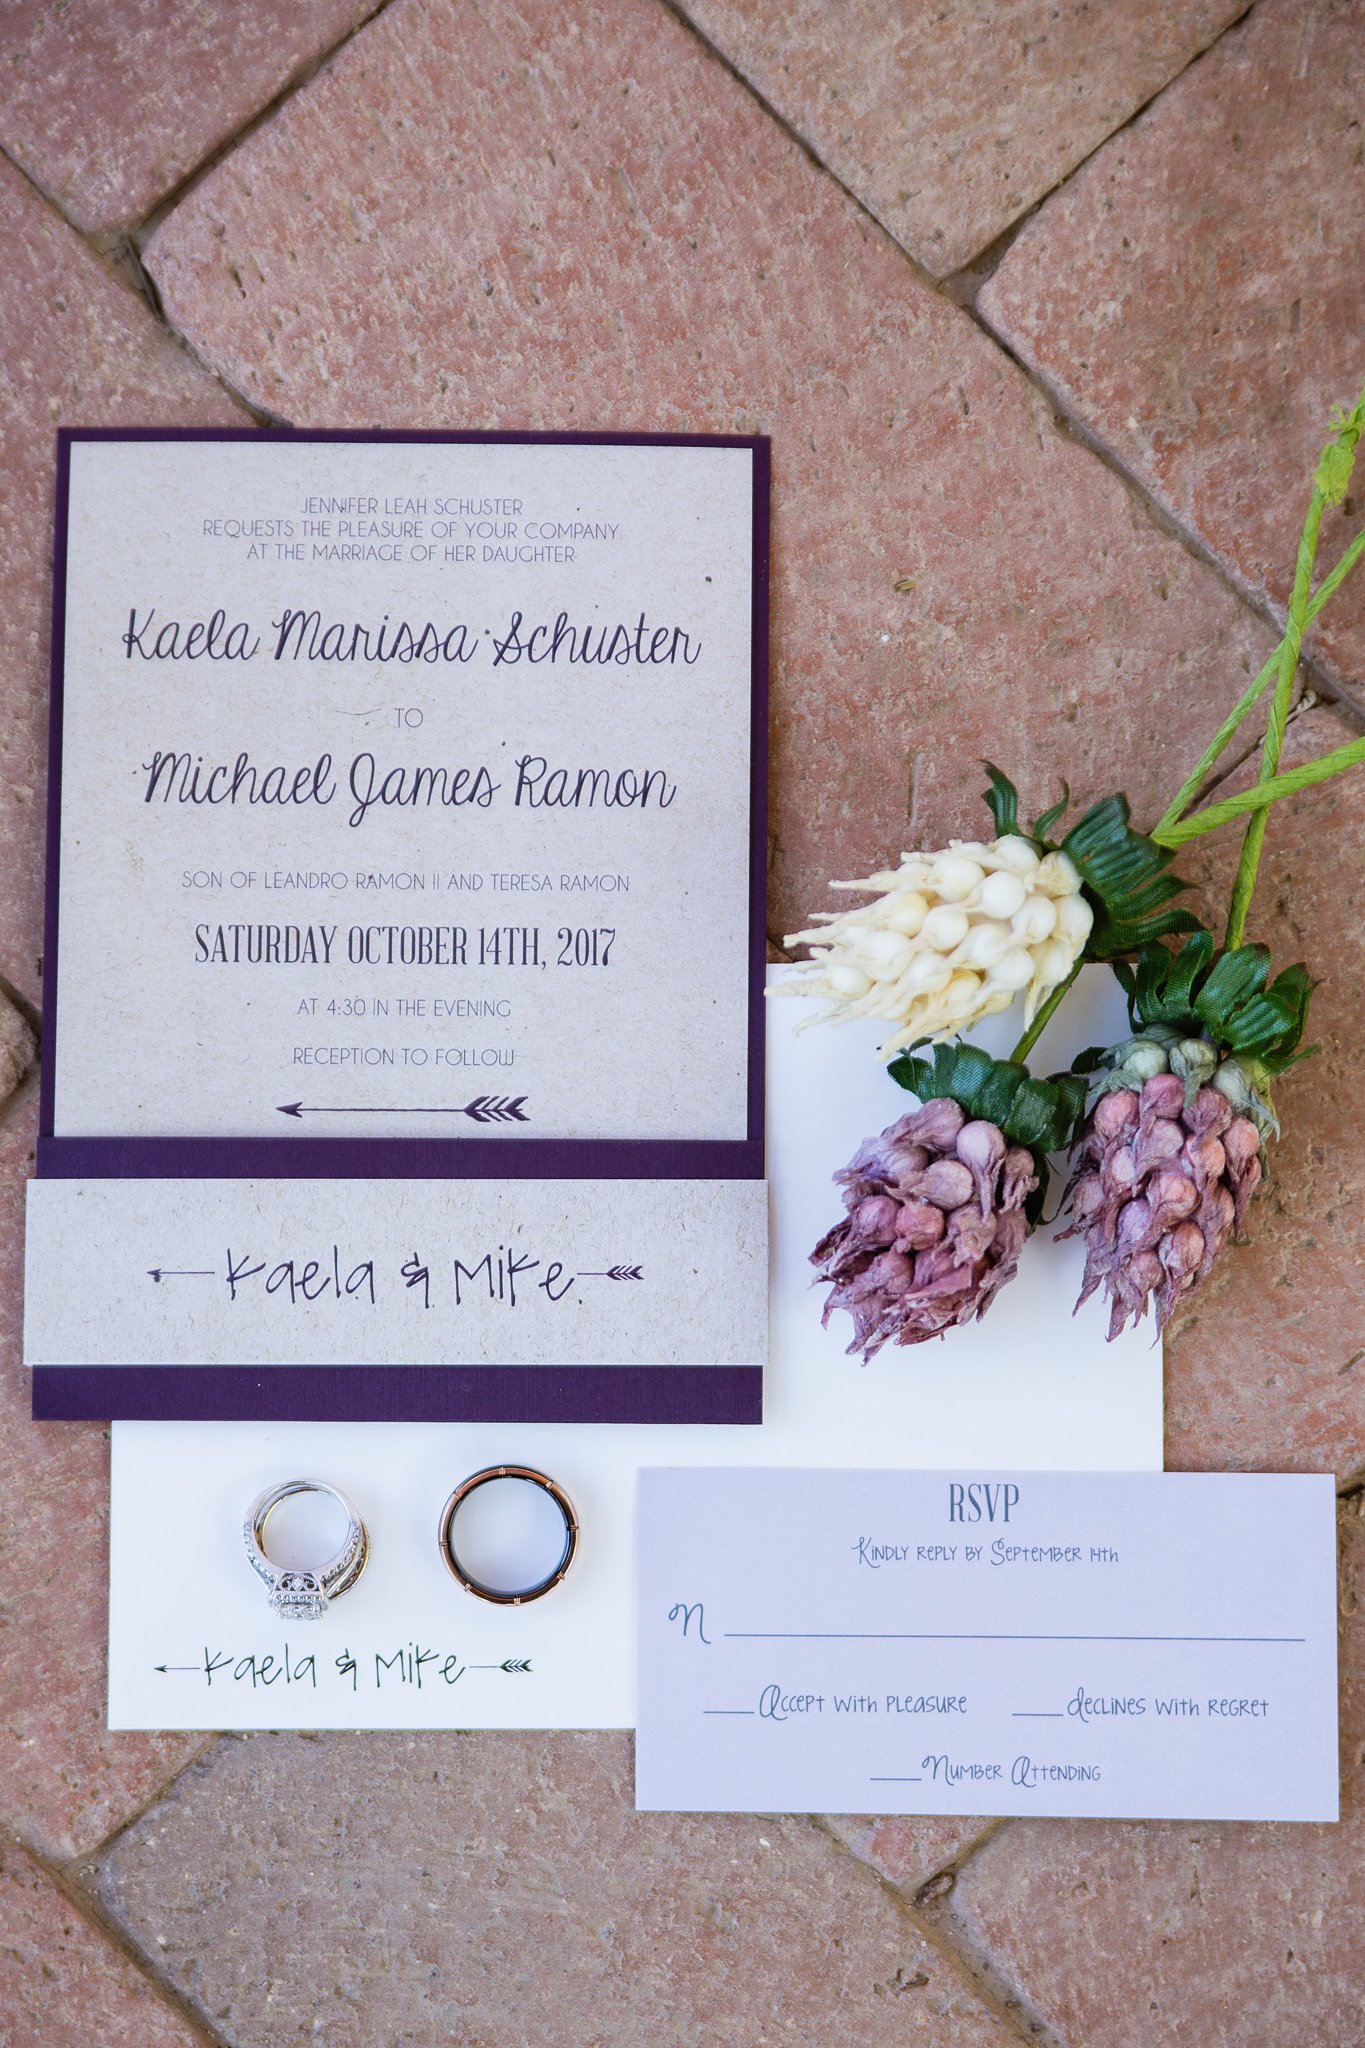 Purple and grey rustic wedding invitations with bride and groom's rings wedding details by wedding photographers PMA Photography.